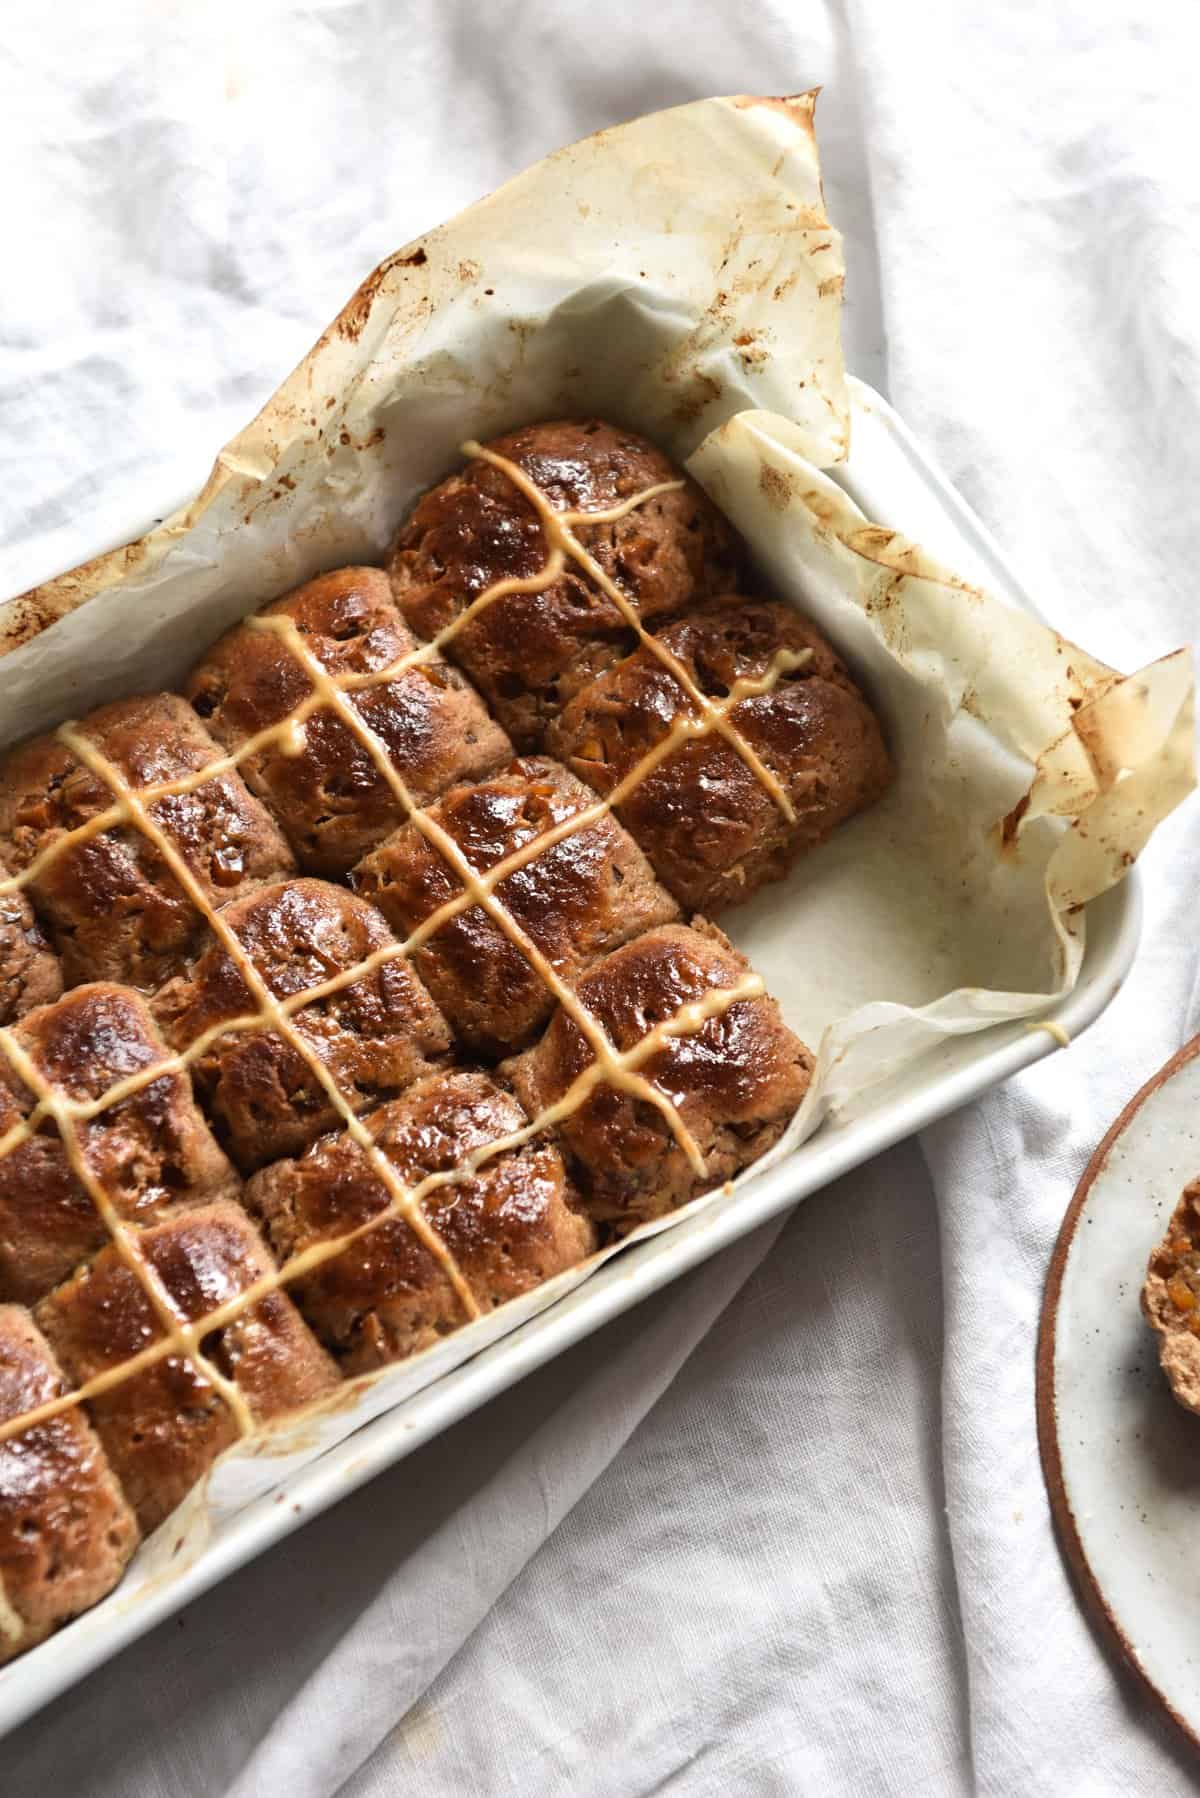 Gluten free sourdough hot cross buns linen tablecloth. One bun is removed and sits on a white ceramic plate to the bottom right of the baking dish. 